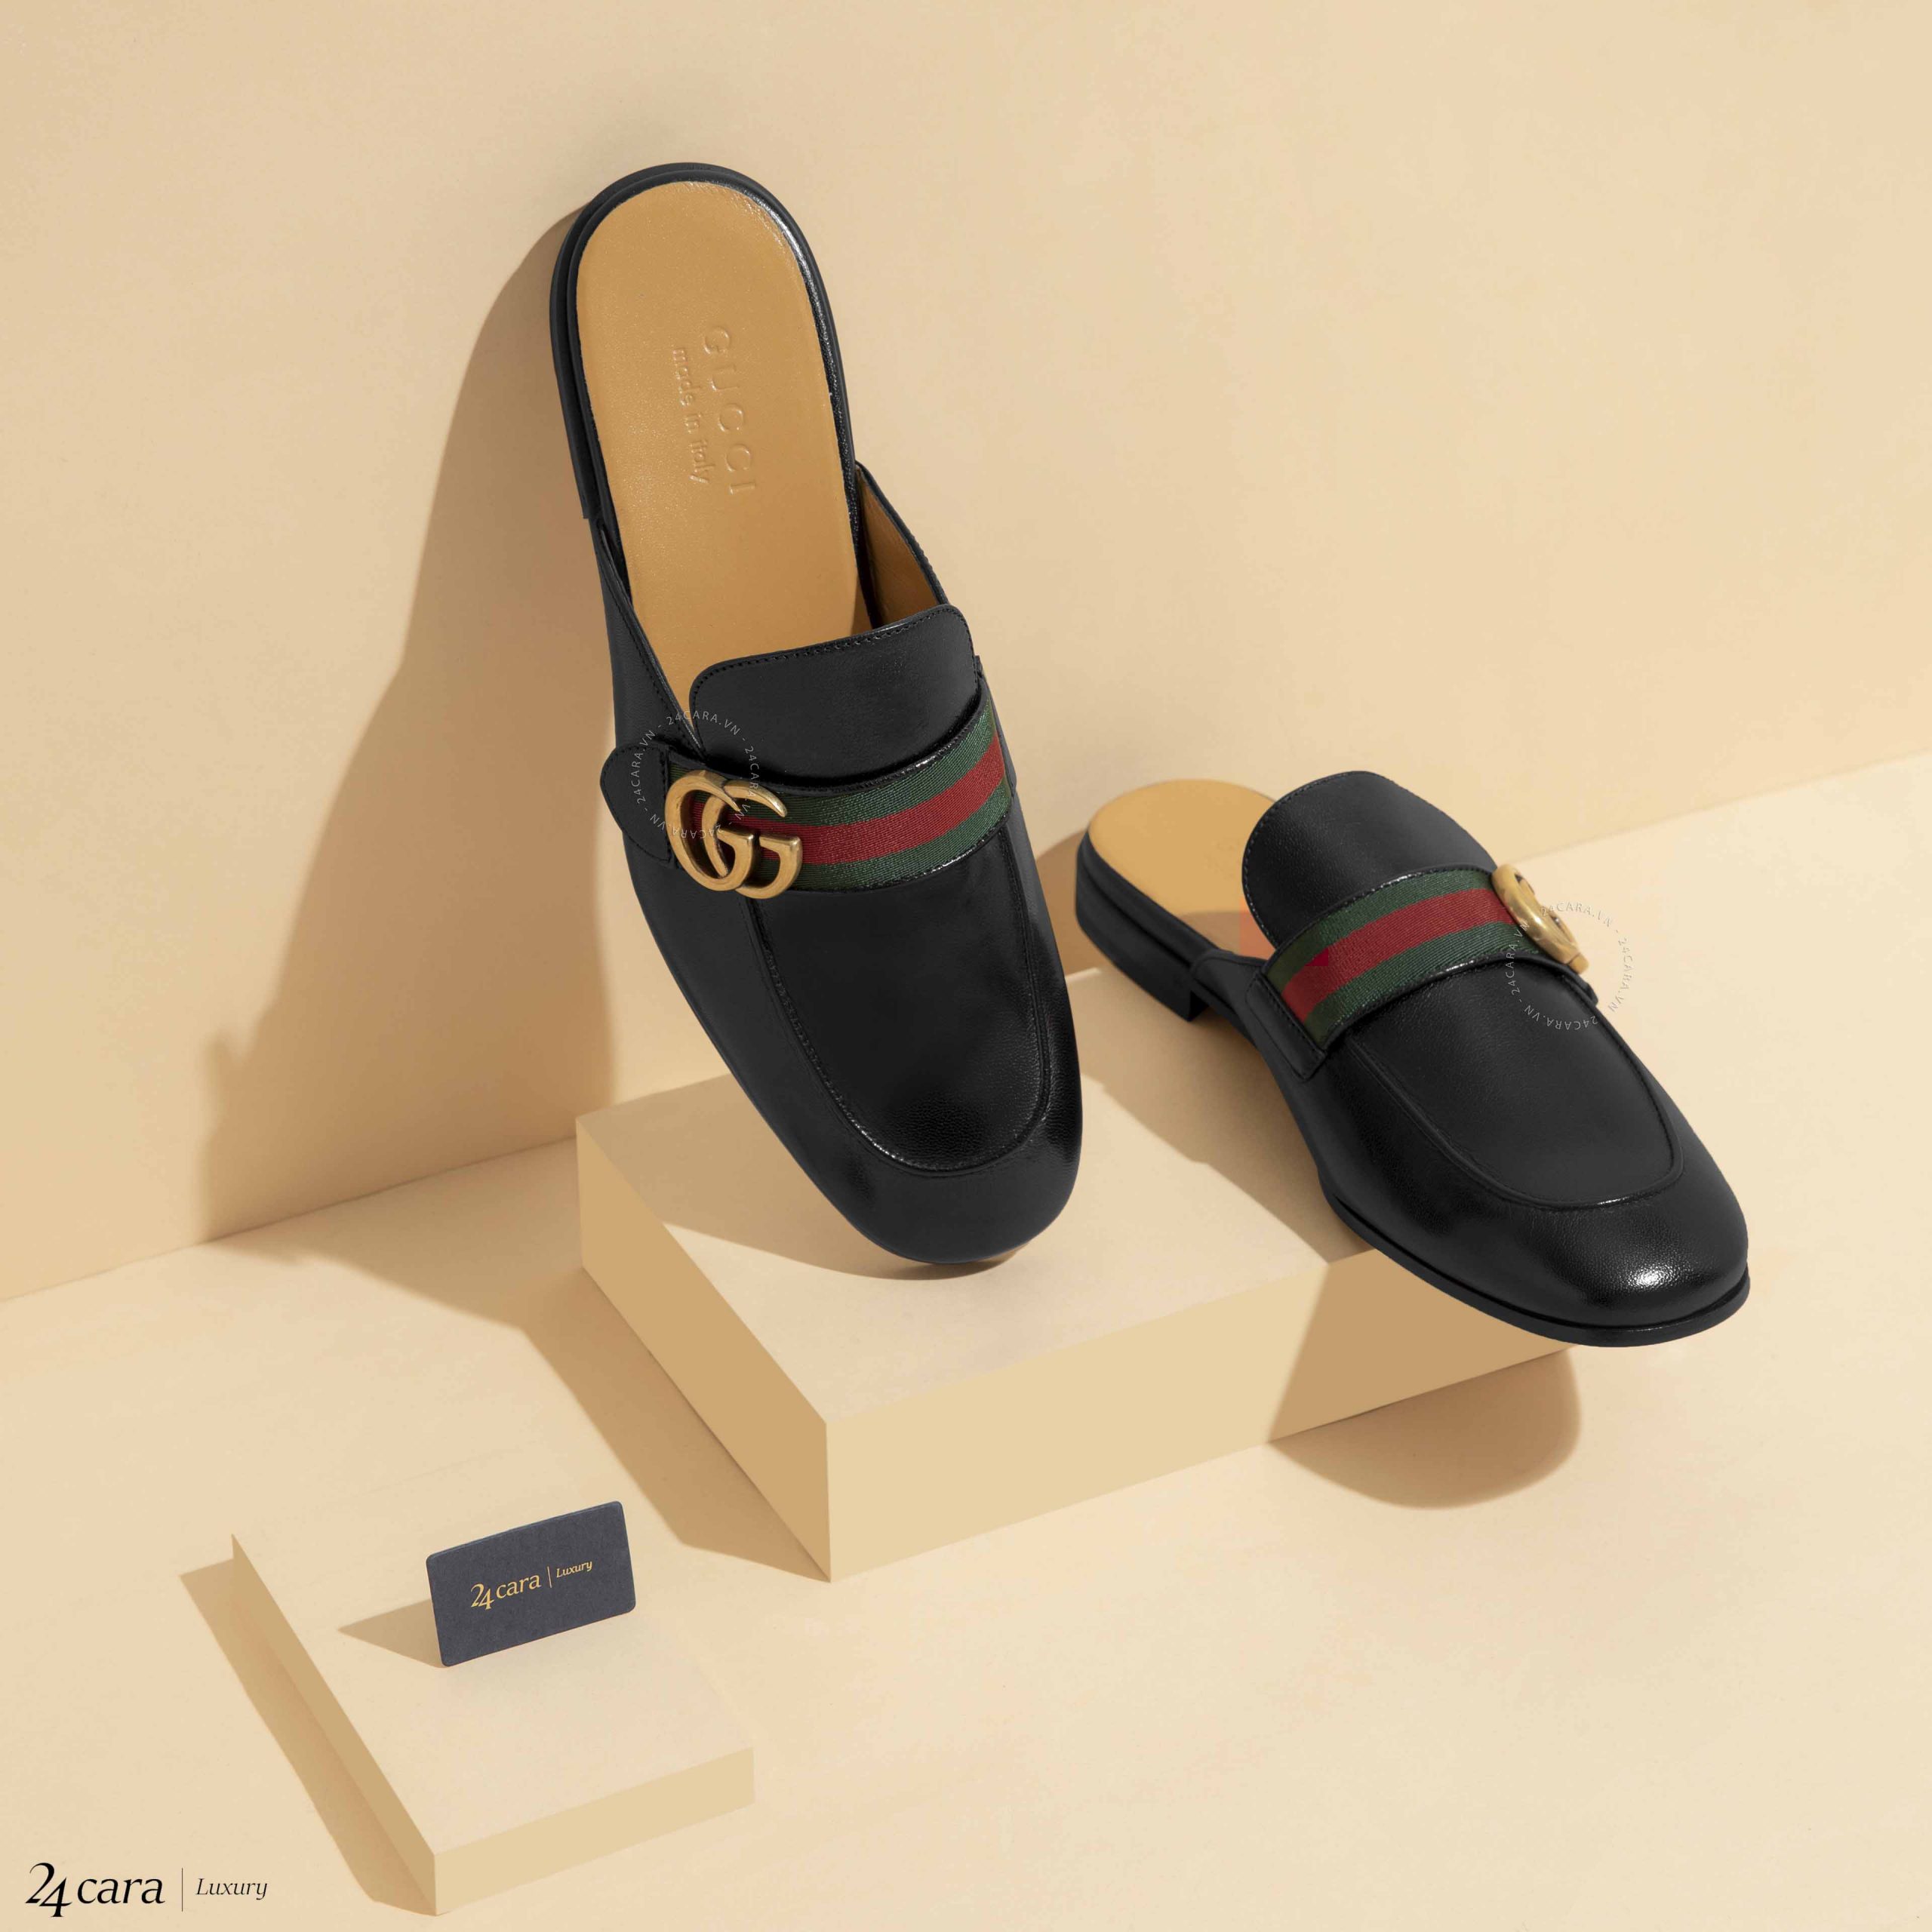 GUCCI GG LEATHER SLIPPER WITH WEB